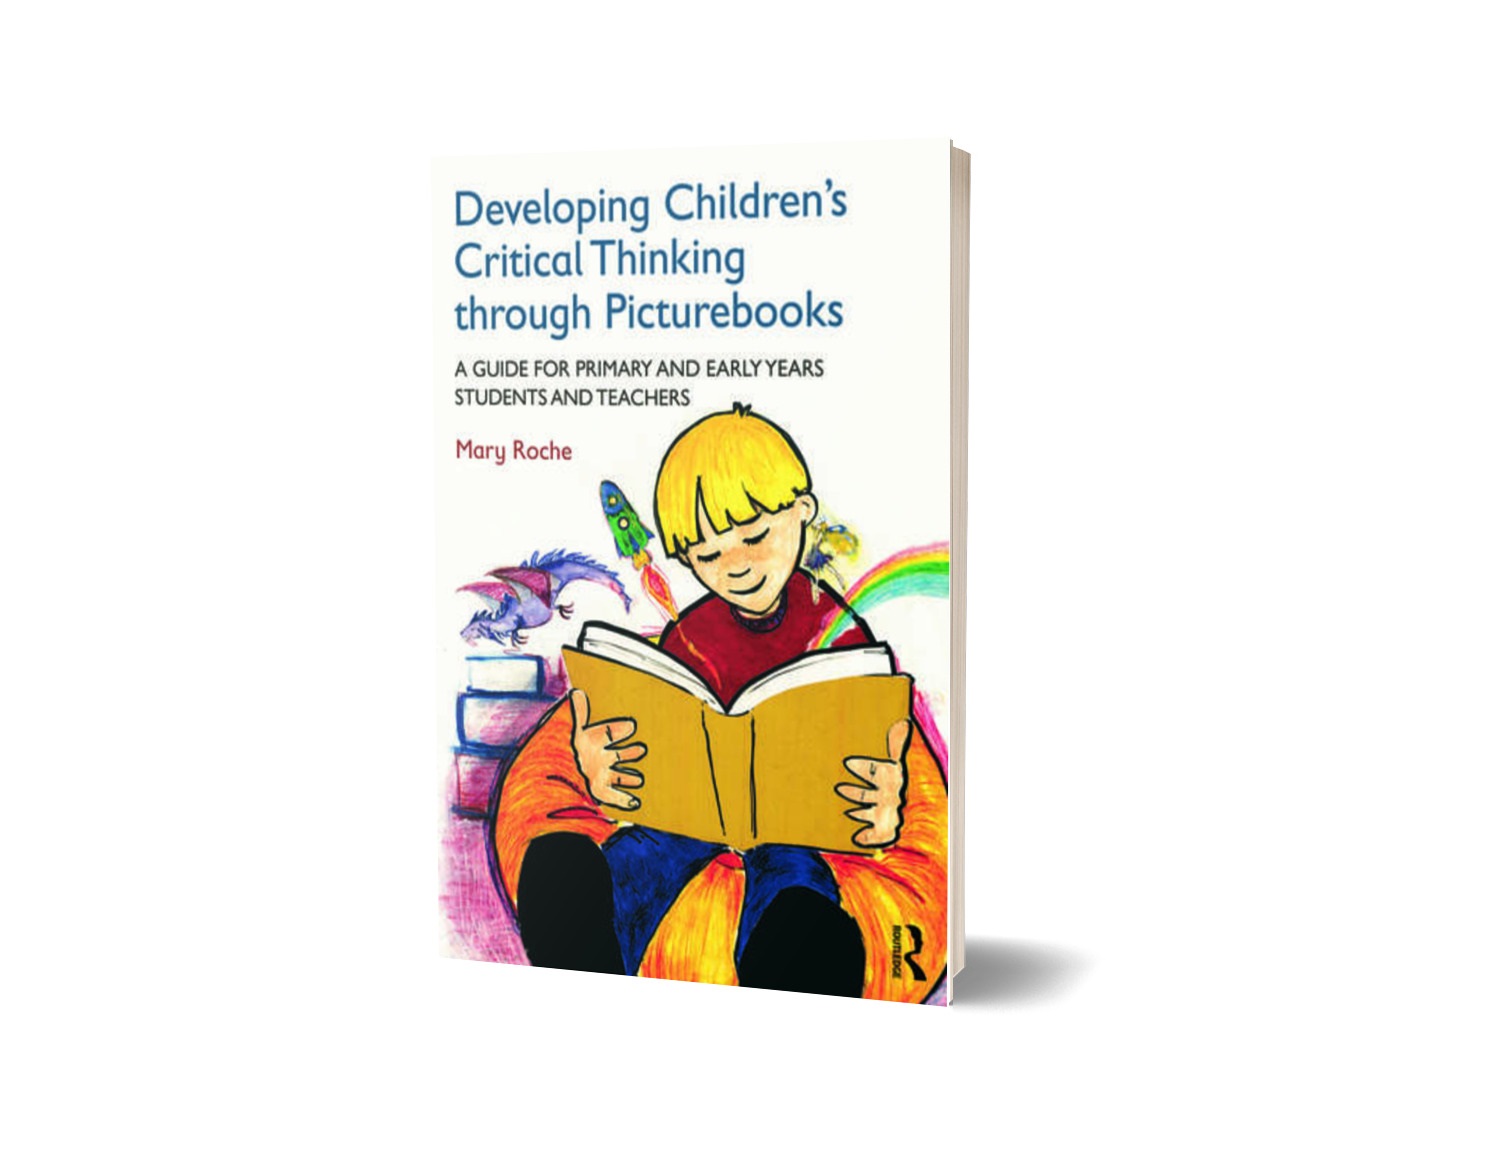 the　Learning　Resources　Outside　Developing　Thinking　Picturebooks　through　Box　Children's　Critical